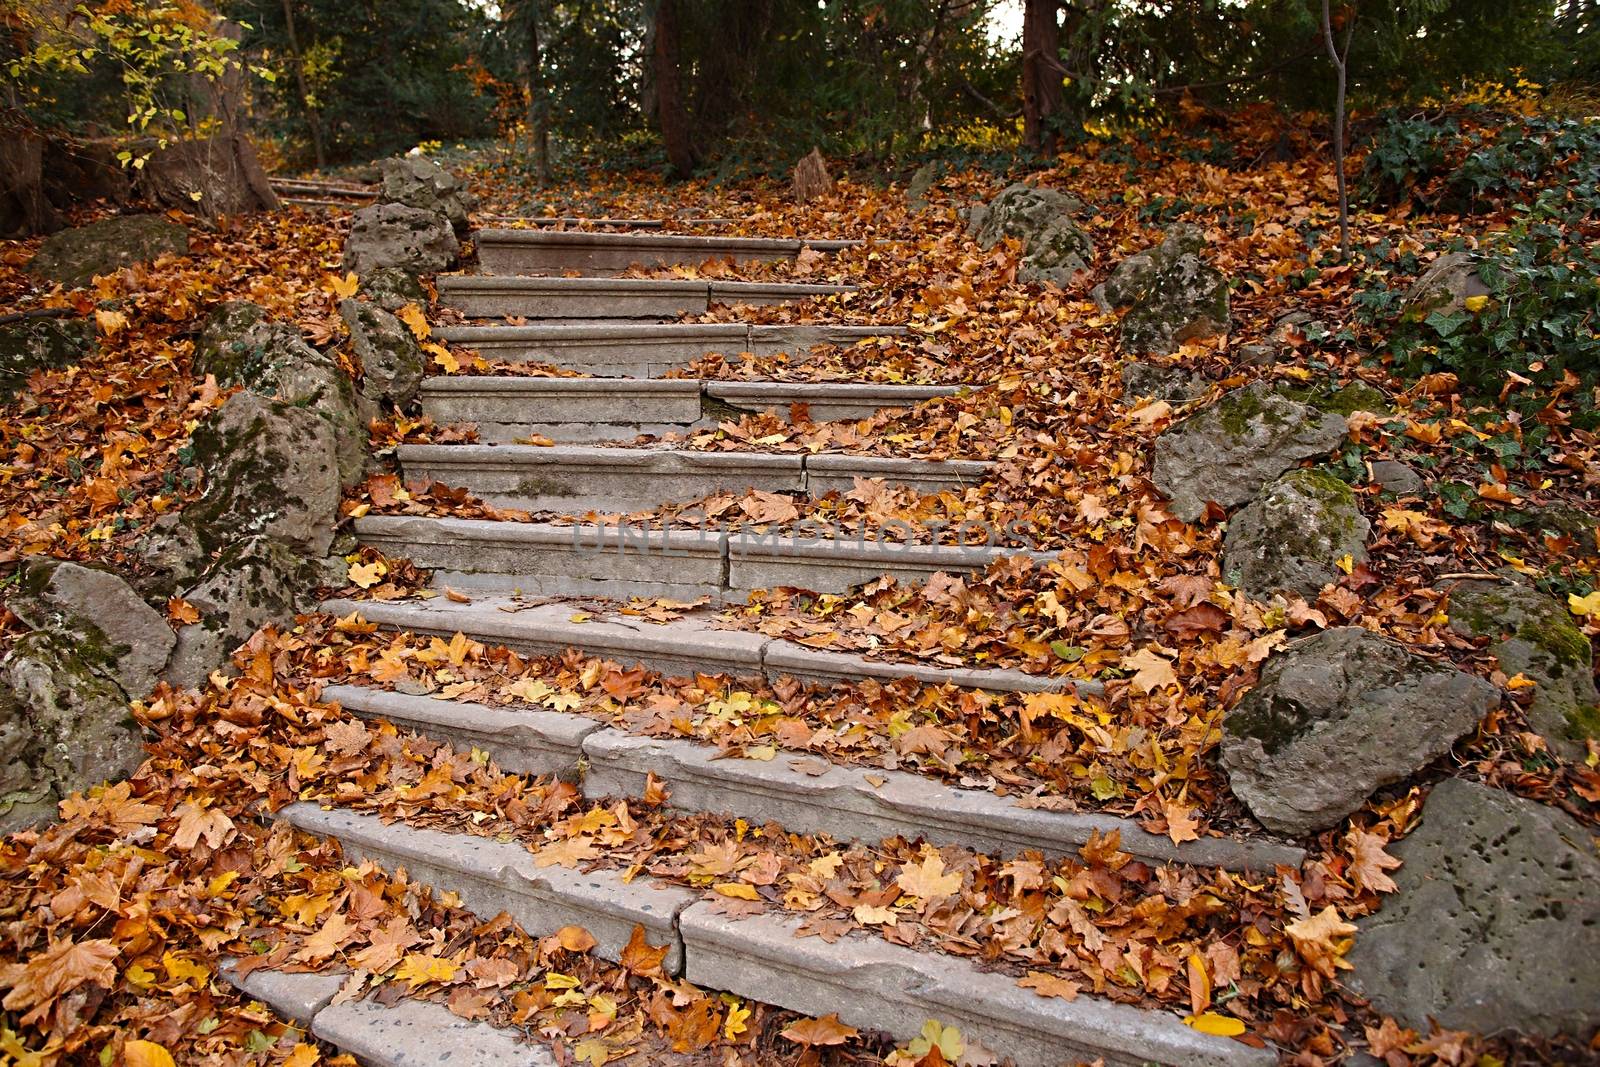 Fallen leaves on stone stairs